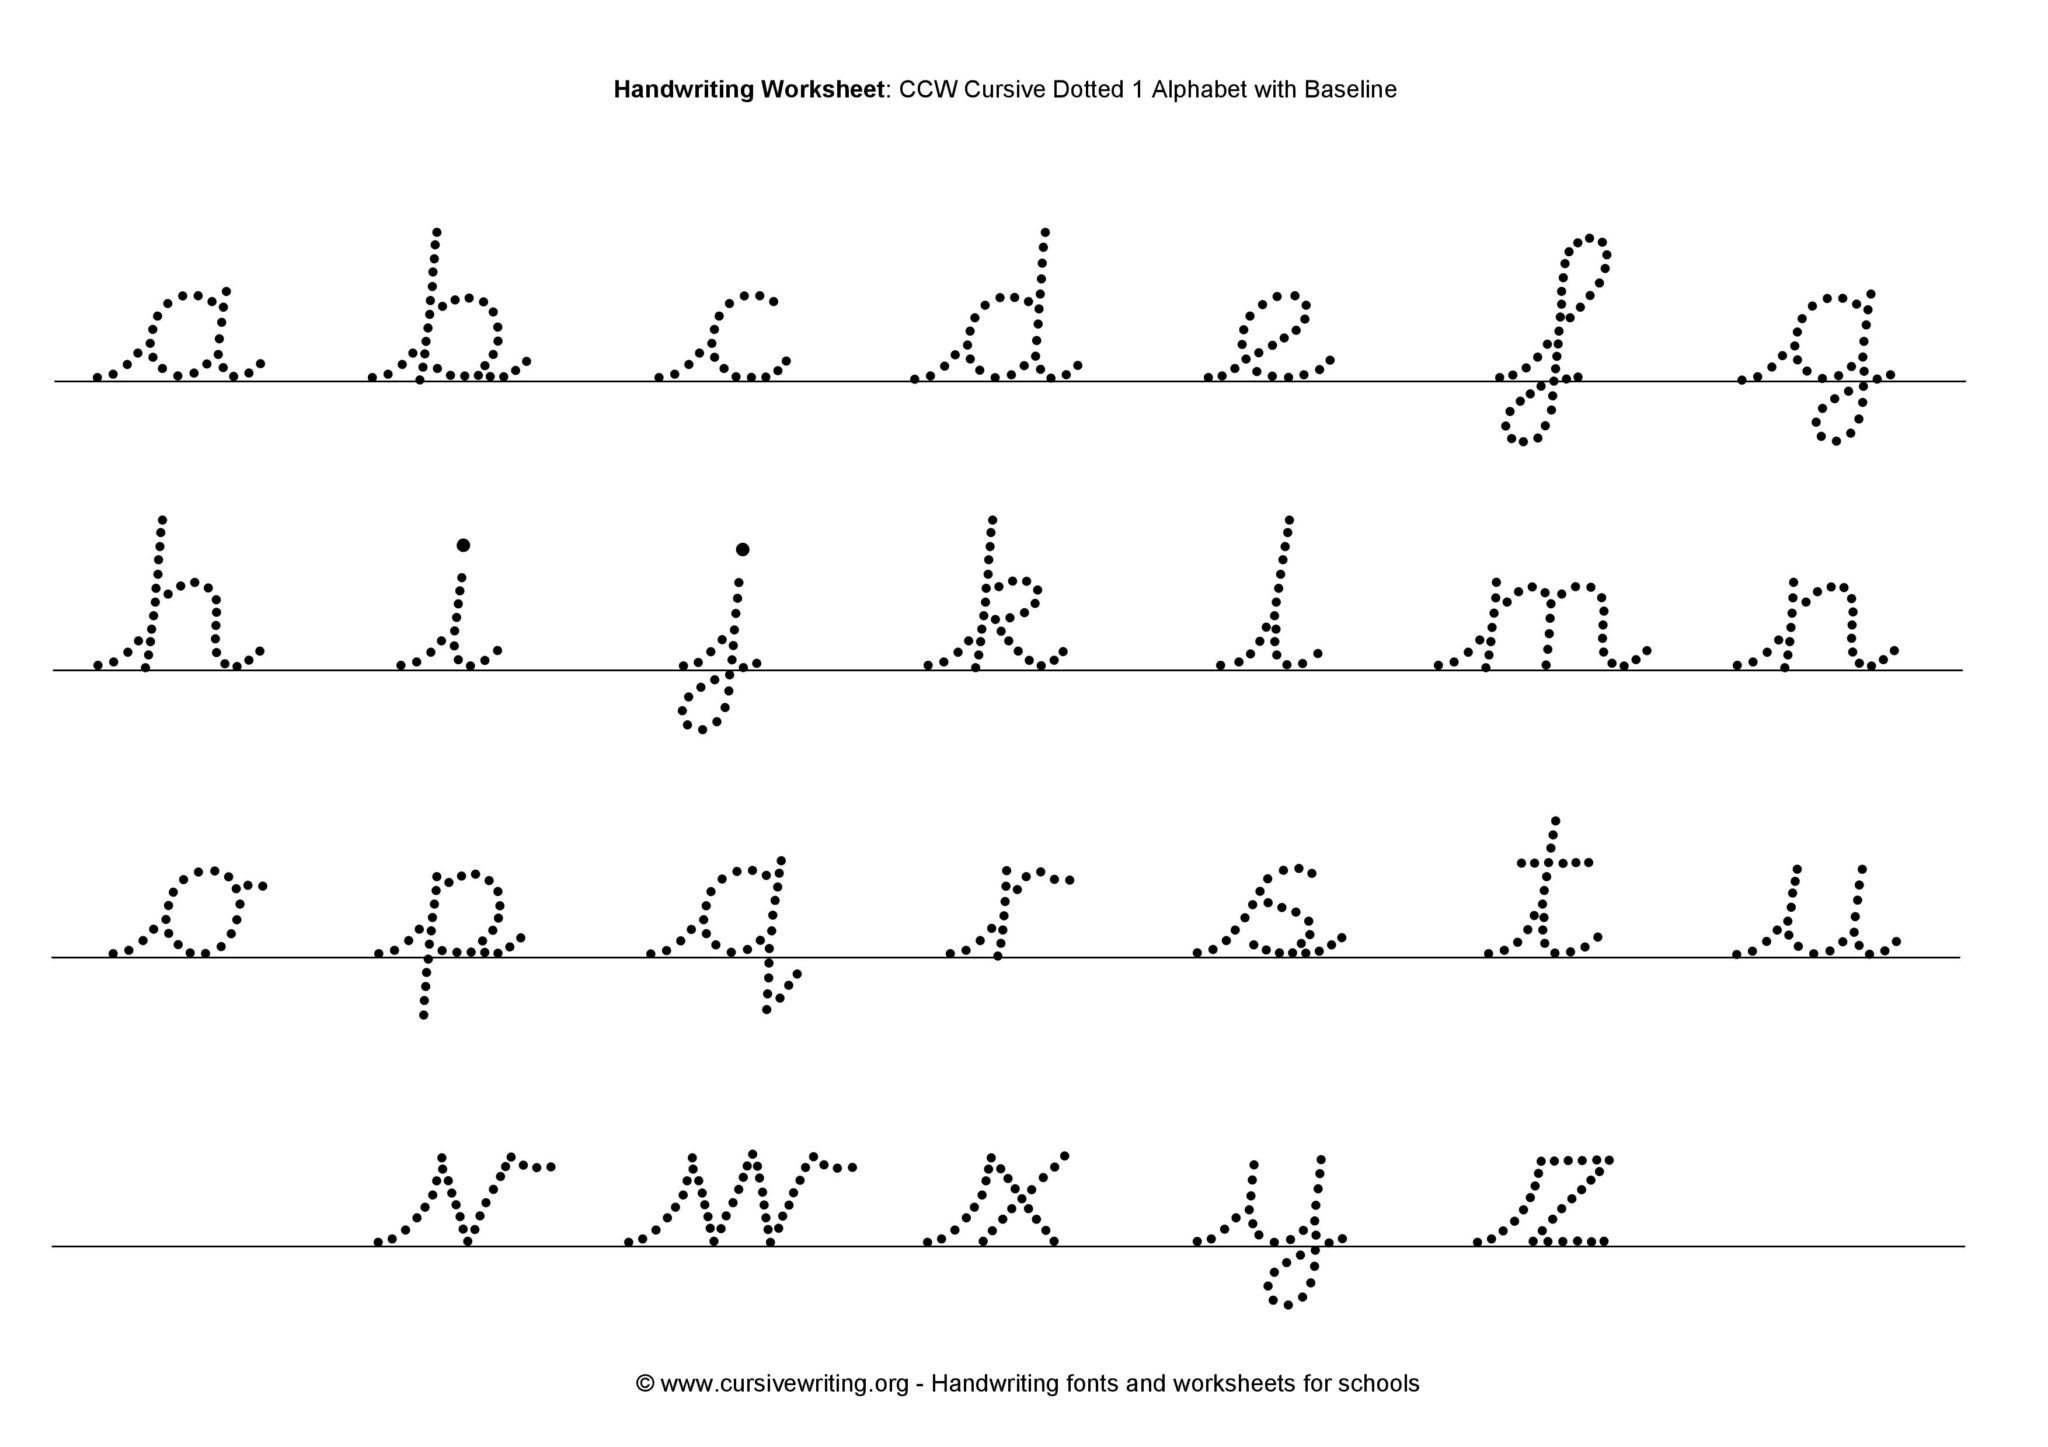 How to write better cursive